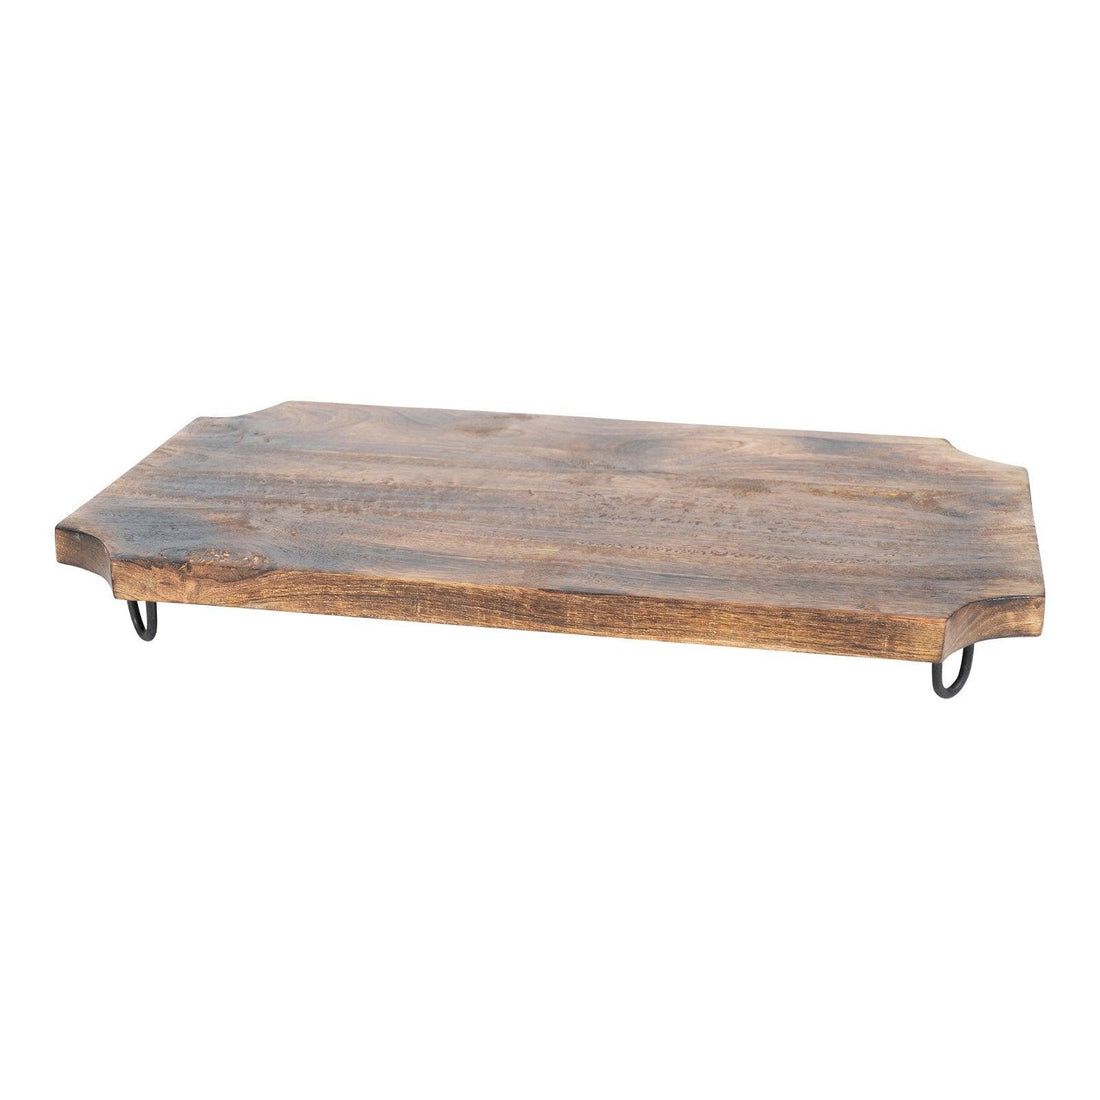 Wooden Distressed Chopping Board On Legs 39cm - £28.99 - Trays & Chopping Boards 